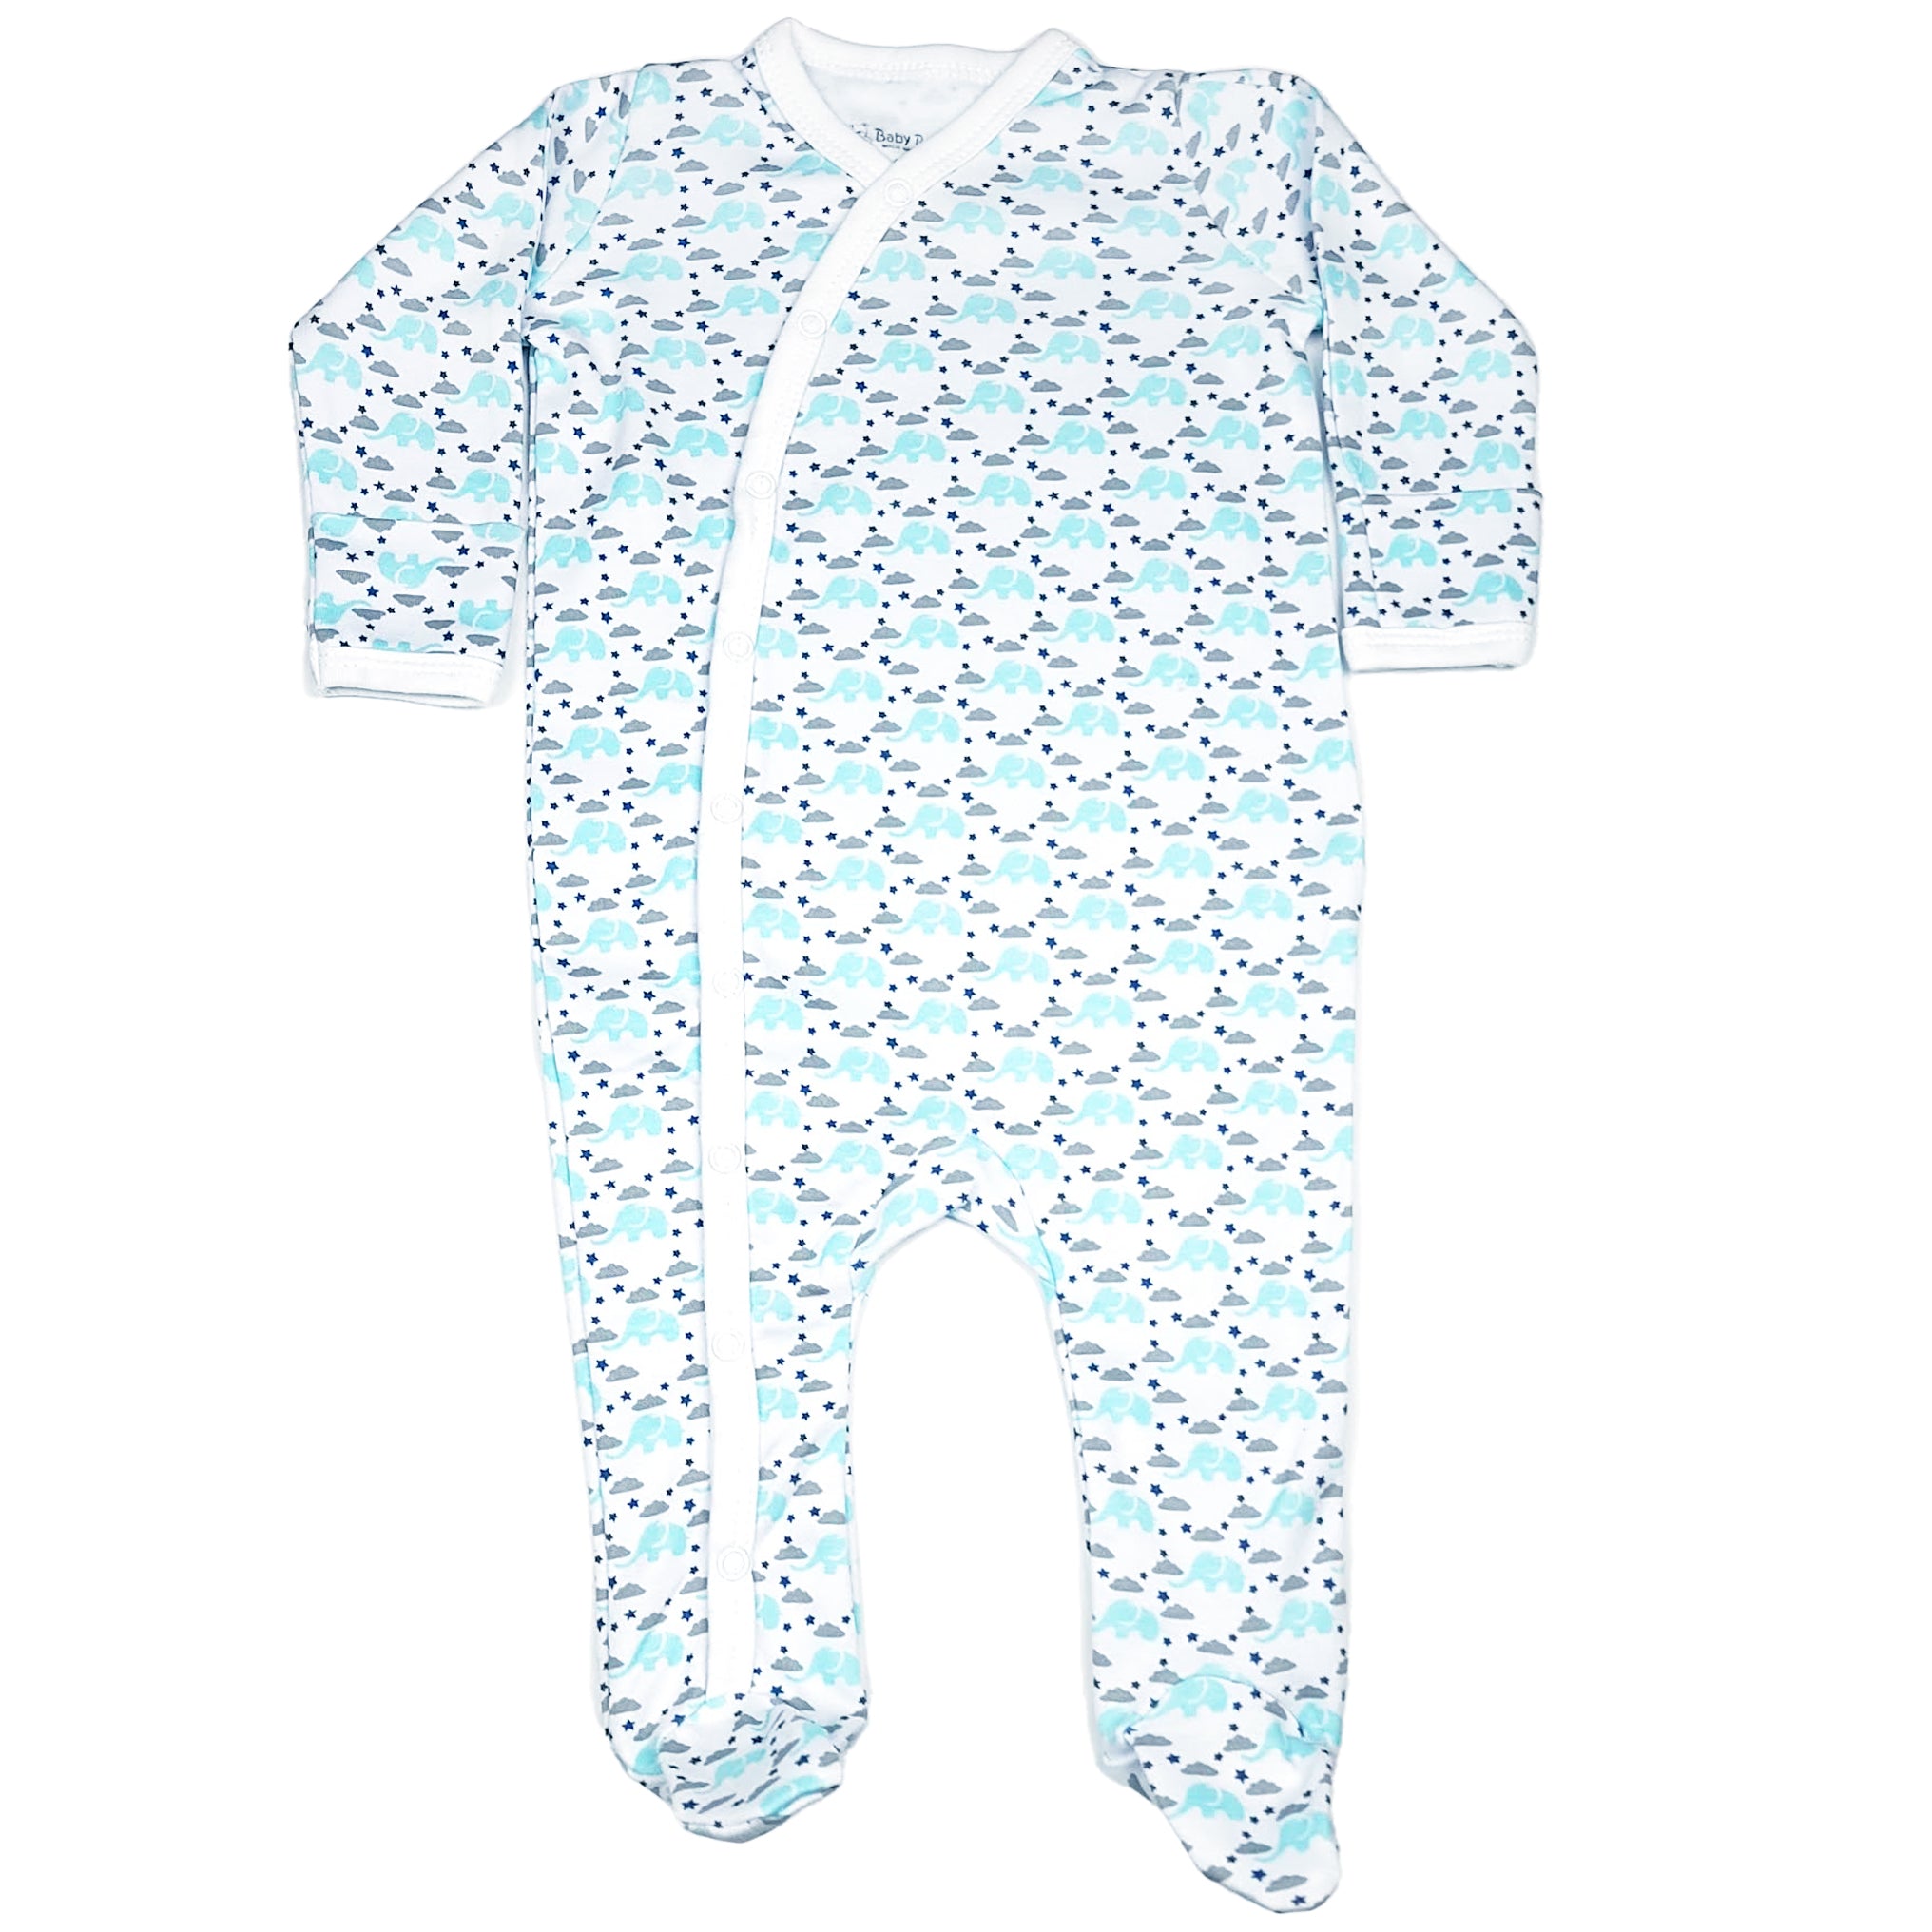 123 Bear Footed Sleep-N-Play PJs Rompers Jumpsuit100% Cotton with Mitten Cuffs Unisex Boys Girls